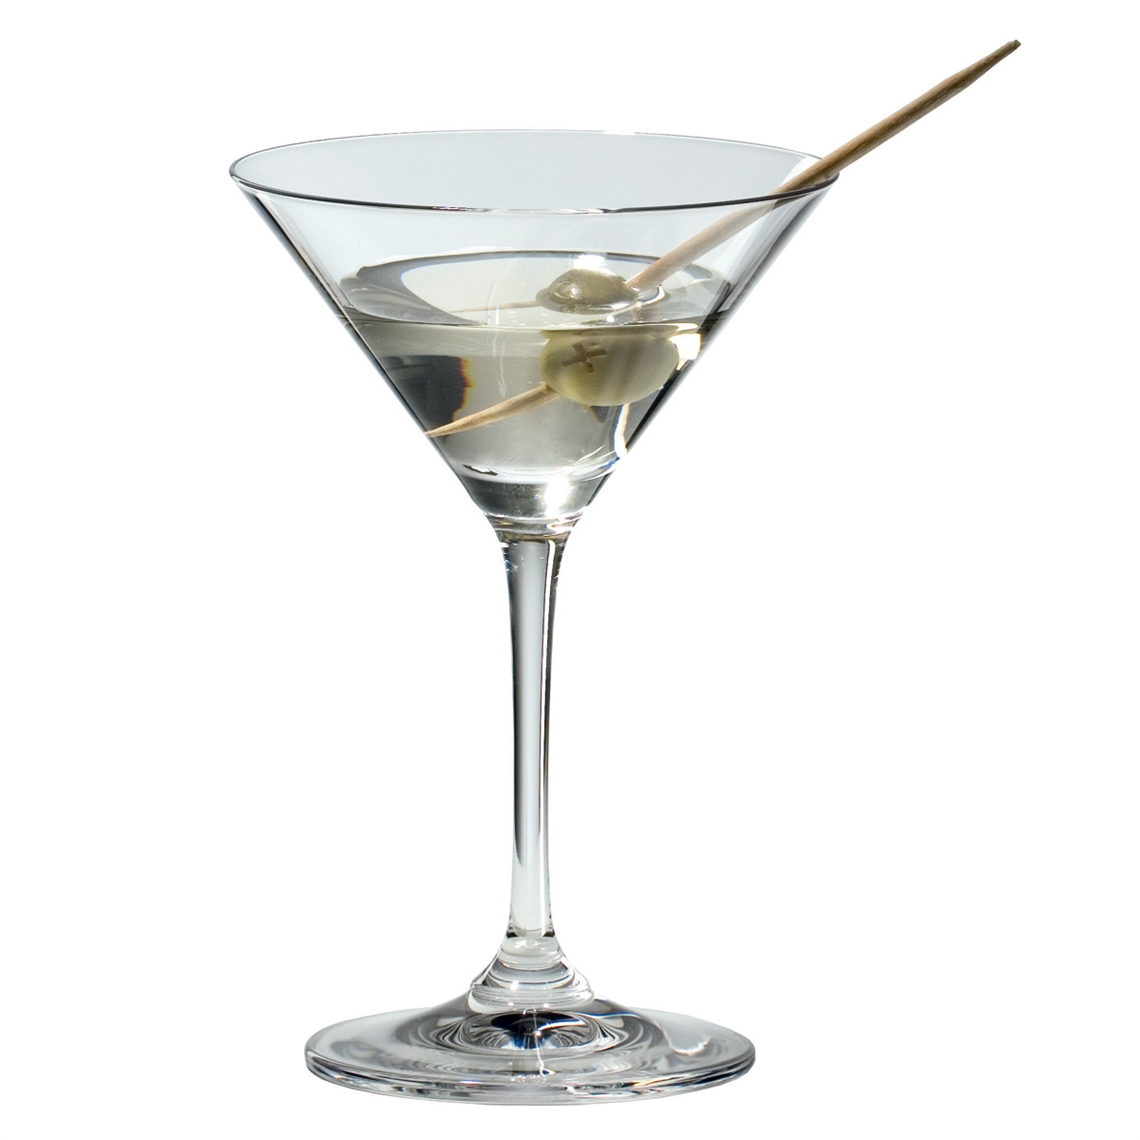 View more white wine glasses from our Martini Glasses range